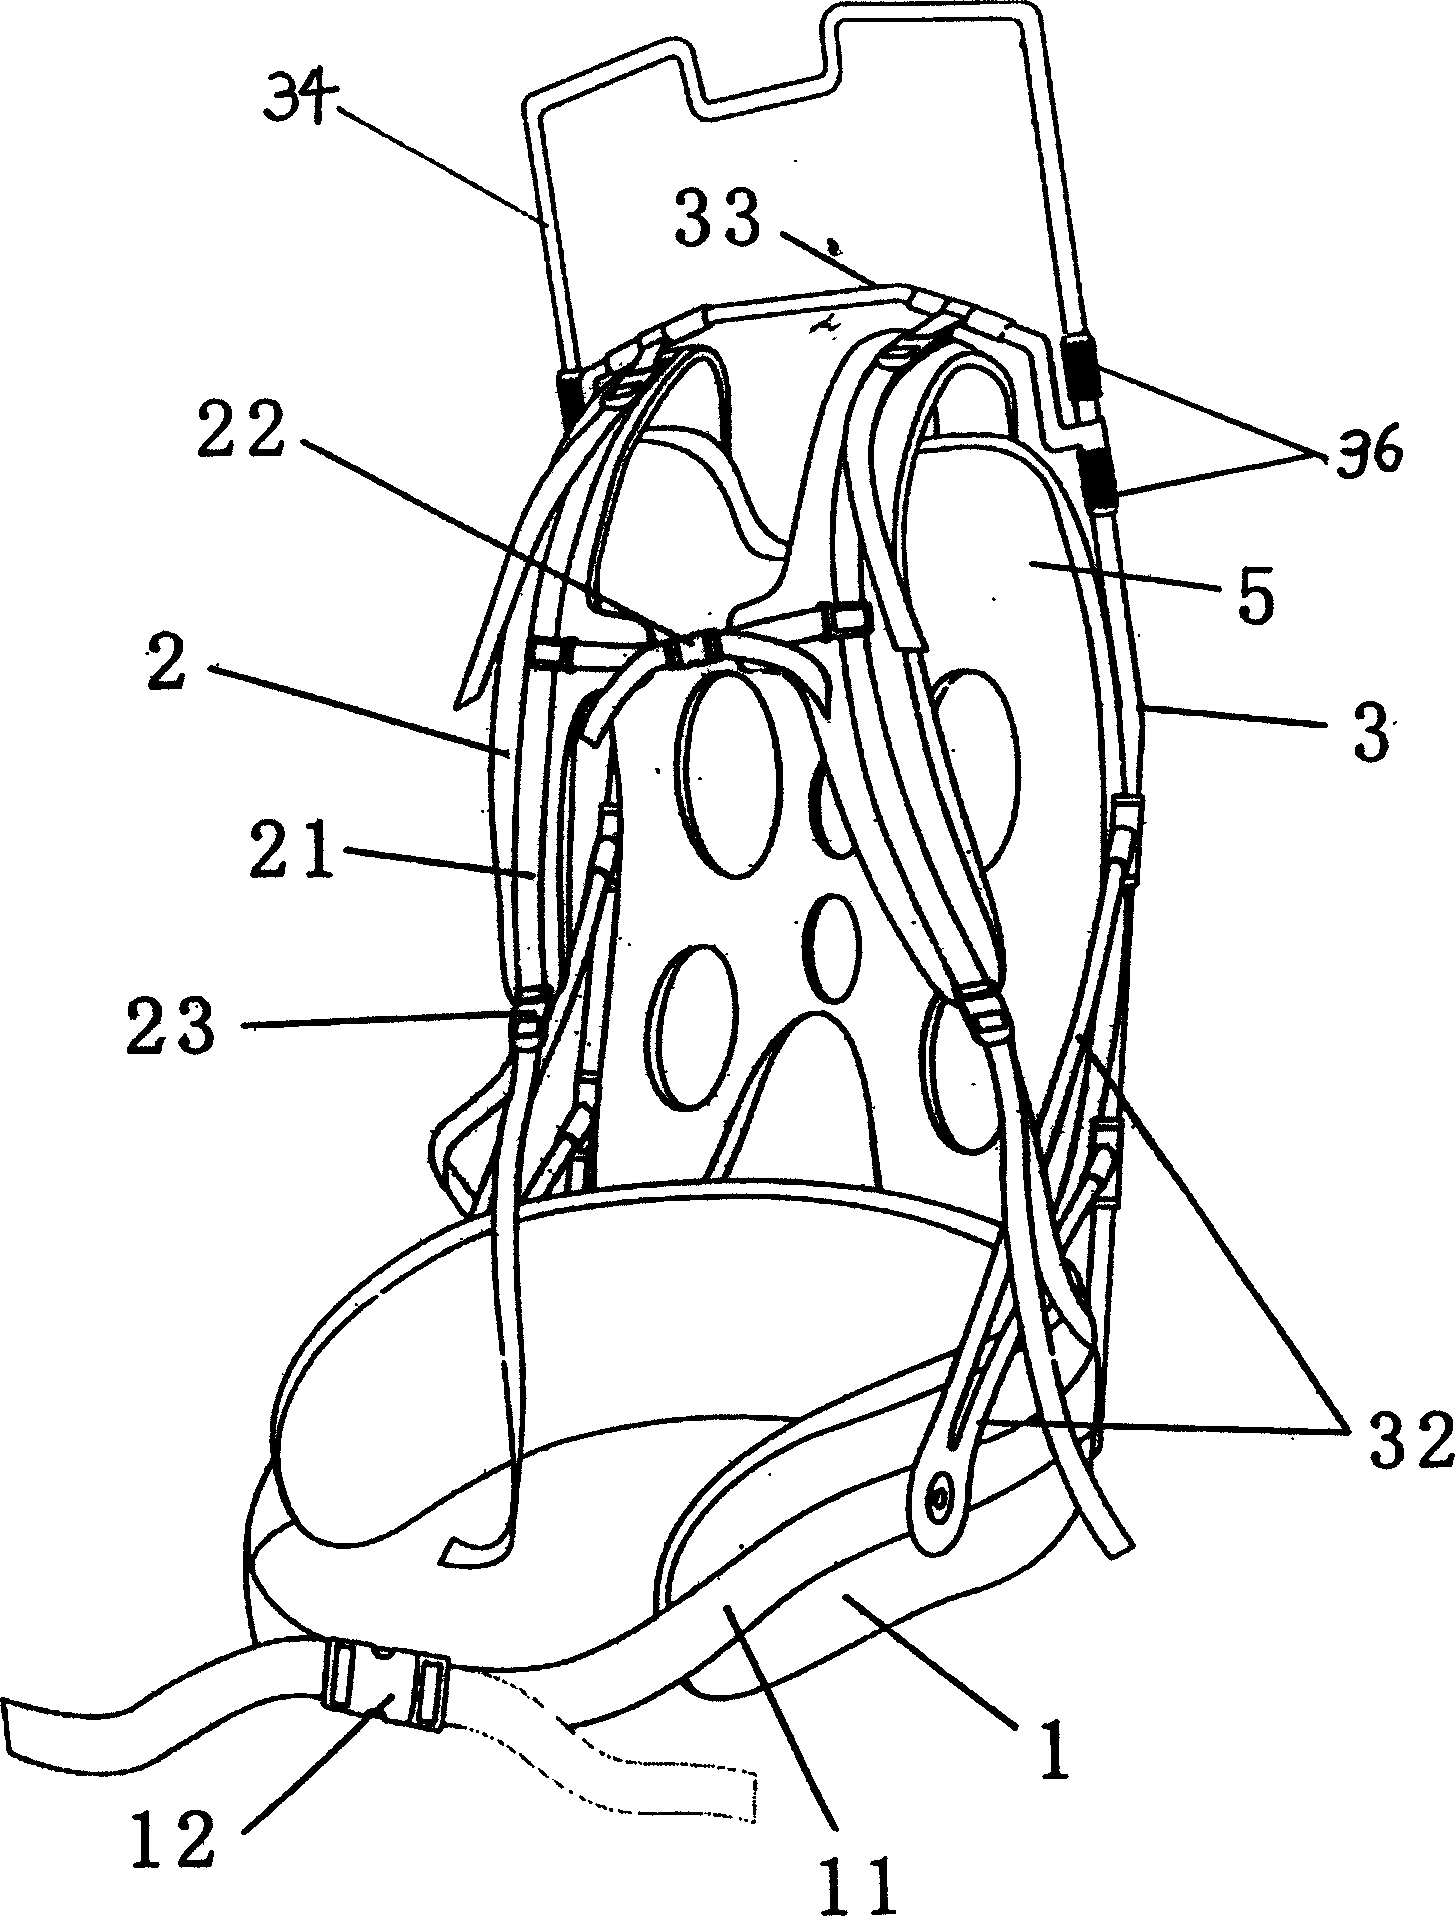 Backpack device